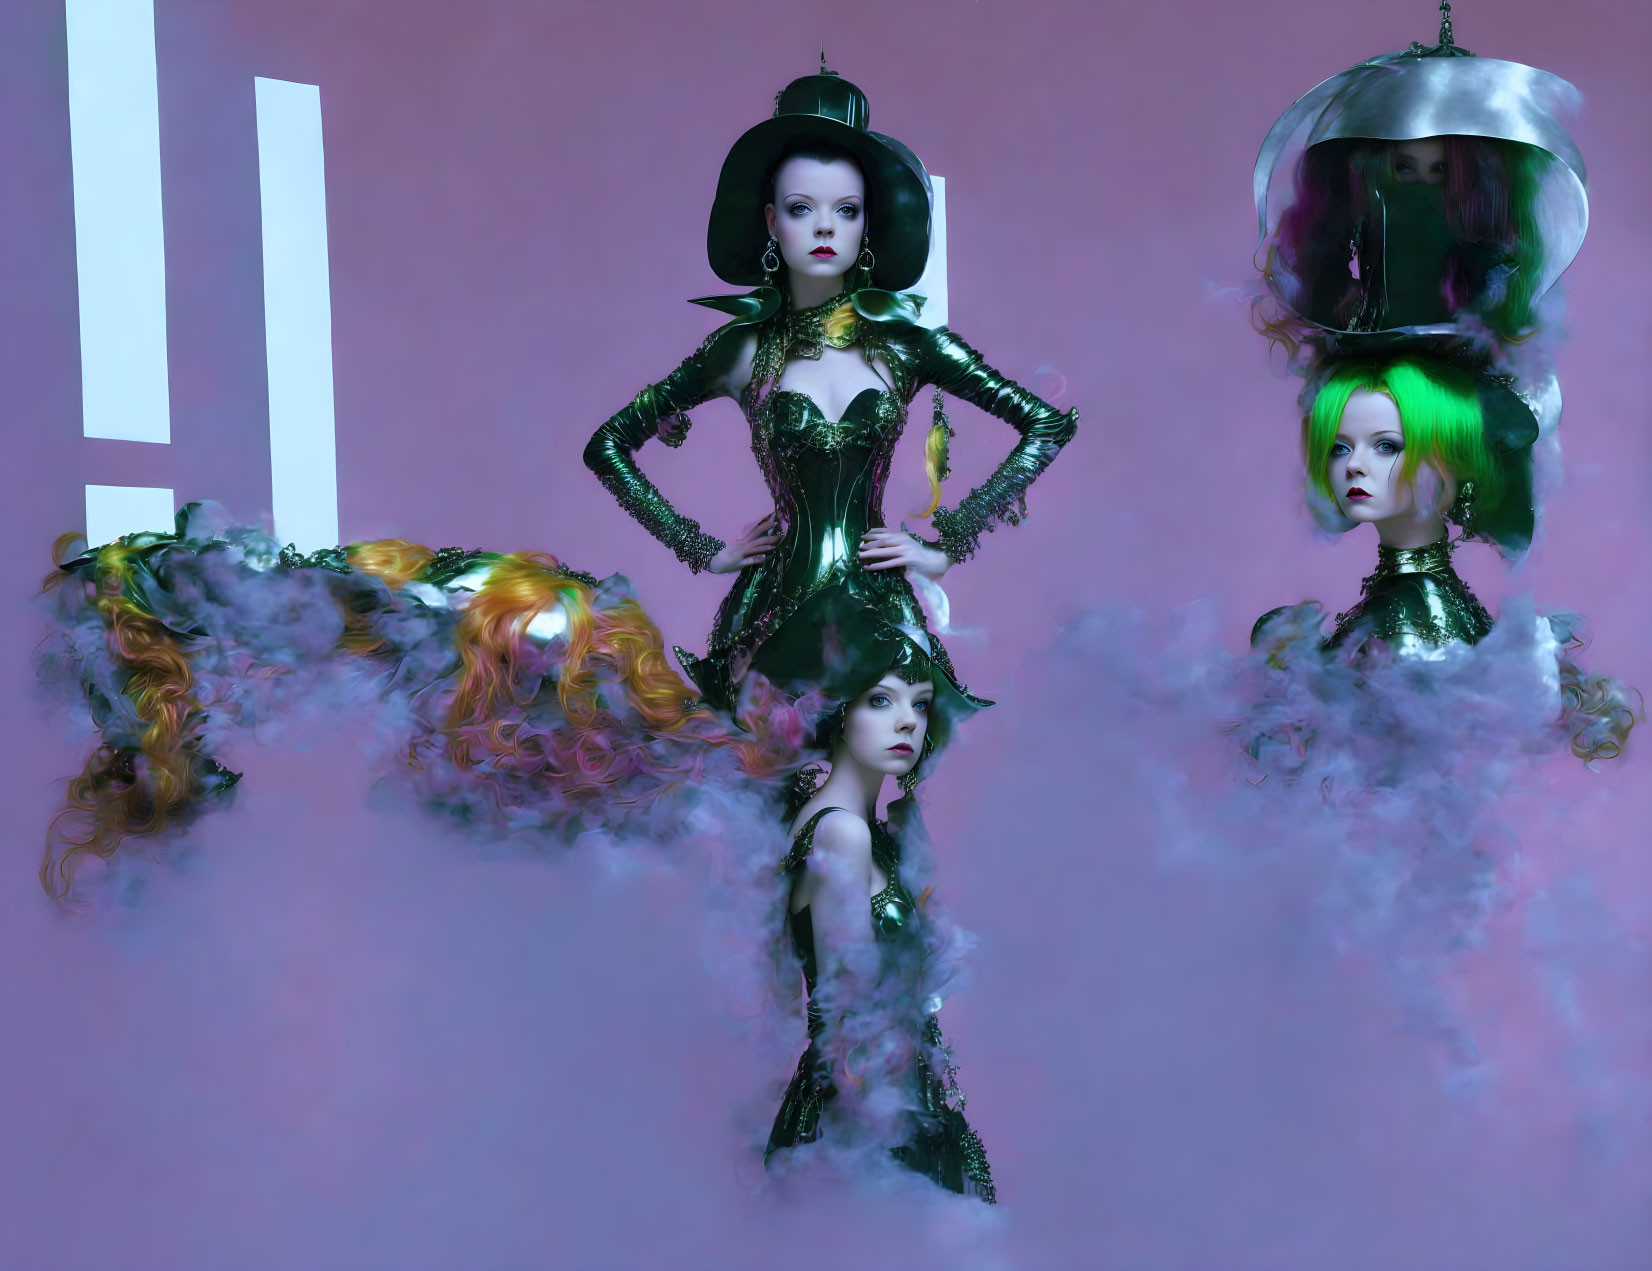 Avant-garde fashion: Three women with exaggerated styles in misty purple setting